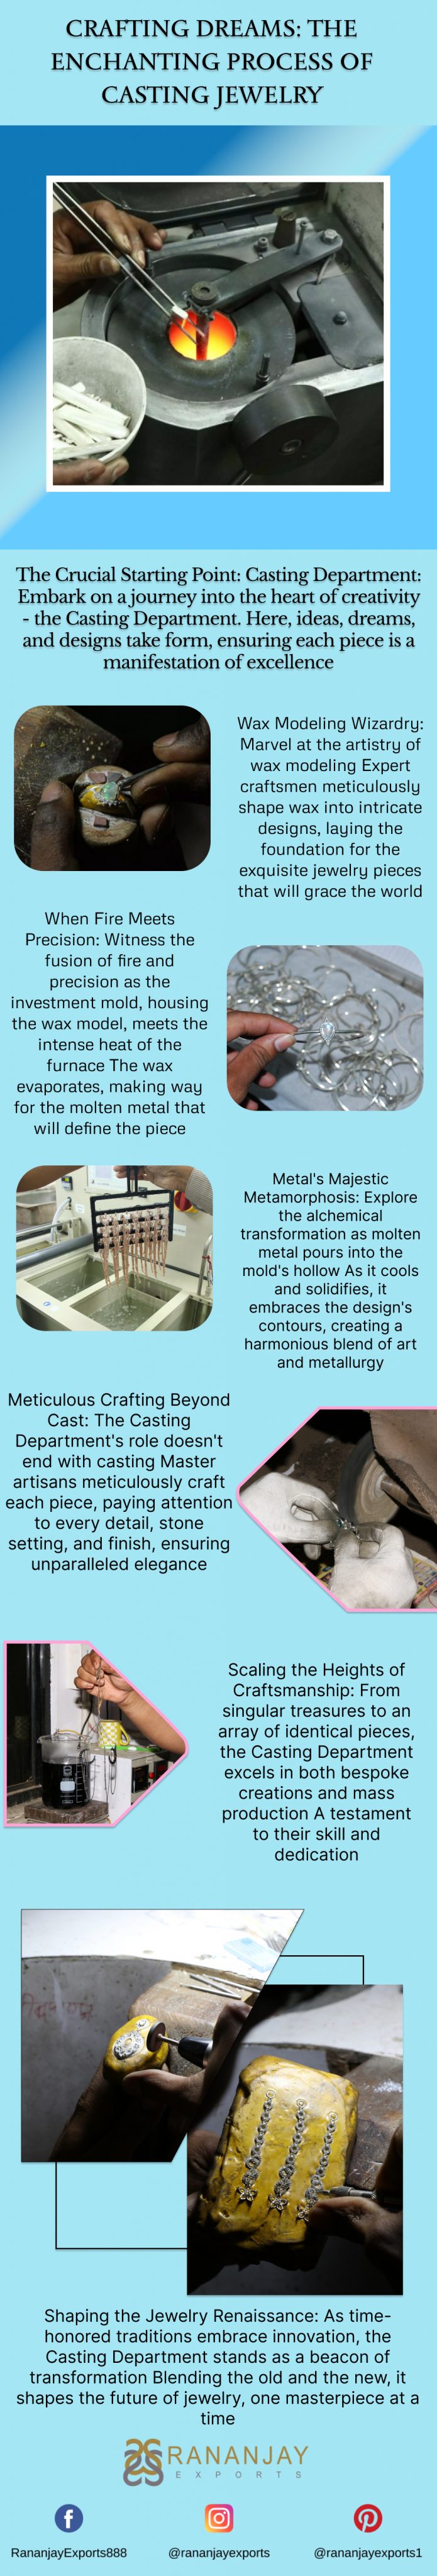 Crafting Dreams: The Enchanting Process of Casting Jewelry